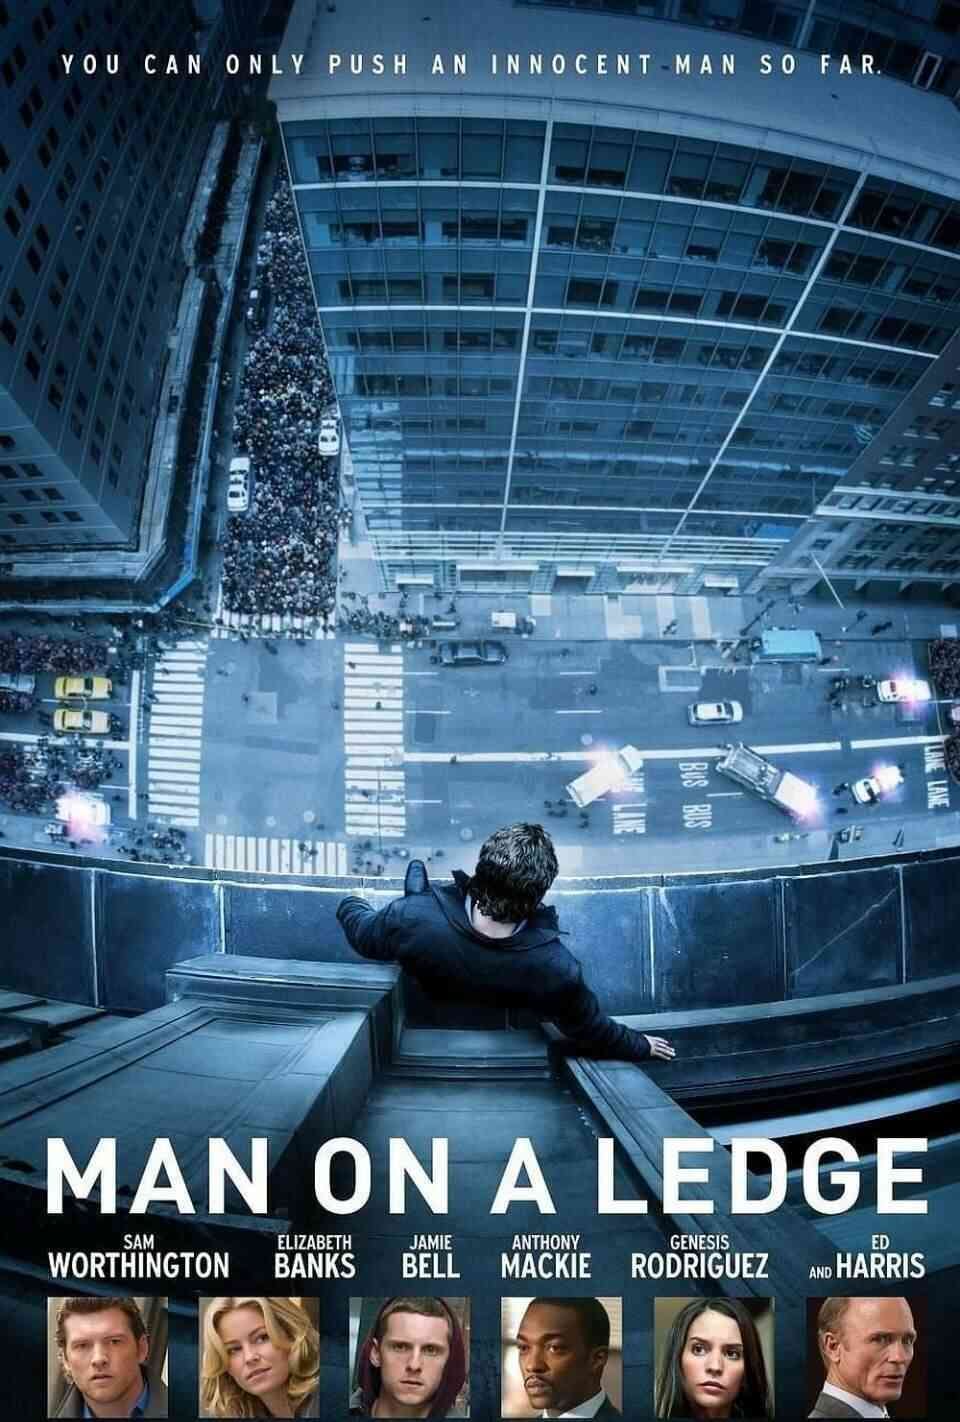 Read Man on a Ledge screenplay (poster)